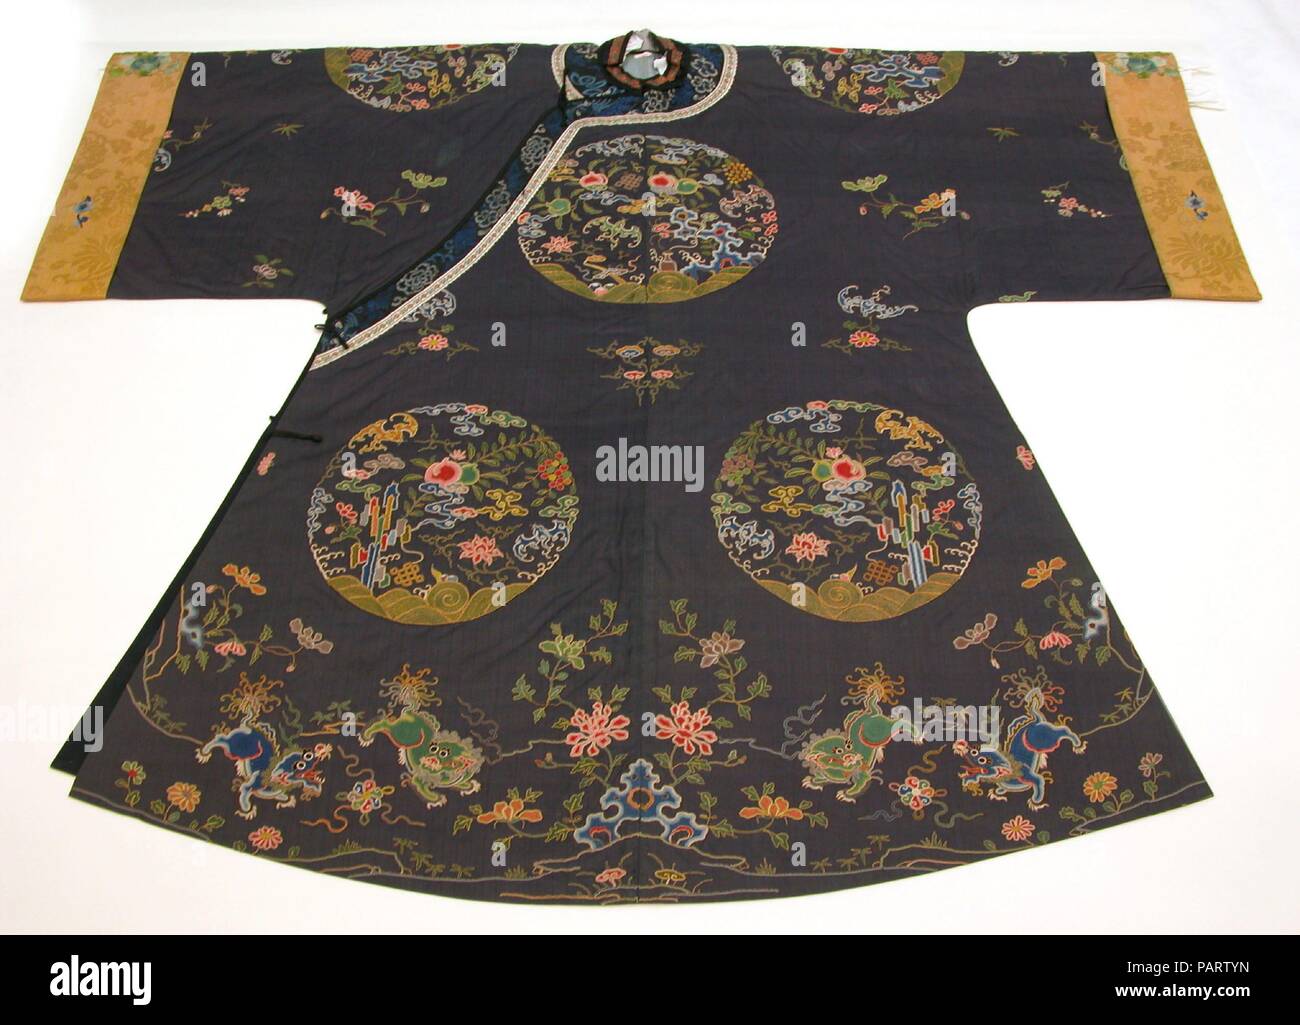 Woman's Informal Robe with Garden Roundels. Culture: China. Dimensions: 43 x 52 in. (109.22 x 132.08 cm). Date: early 18th century.  The roundels on this robe show garden rocks with flowers, fruit, and auspicious elements such as the endless knot and bats ( fu, a homophone with the word for good fortune). At the lower edge of the garment, two pairs of Chinese lions gambol with beribboned balls in a flower-filled garden setting. Museum: Metropolitan Museum of Art, New York, USA. Stock Photo